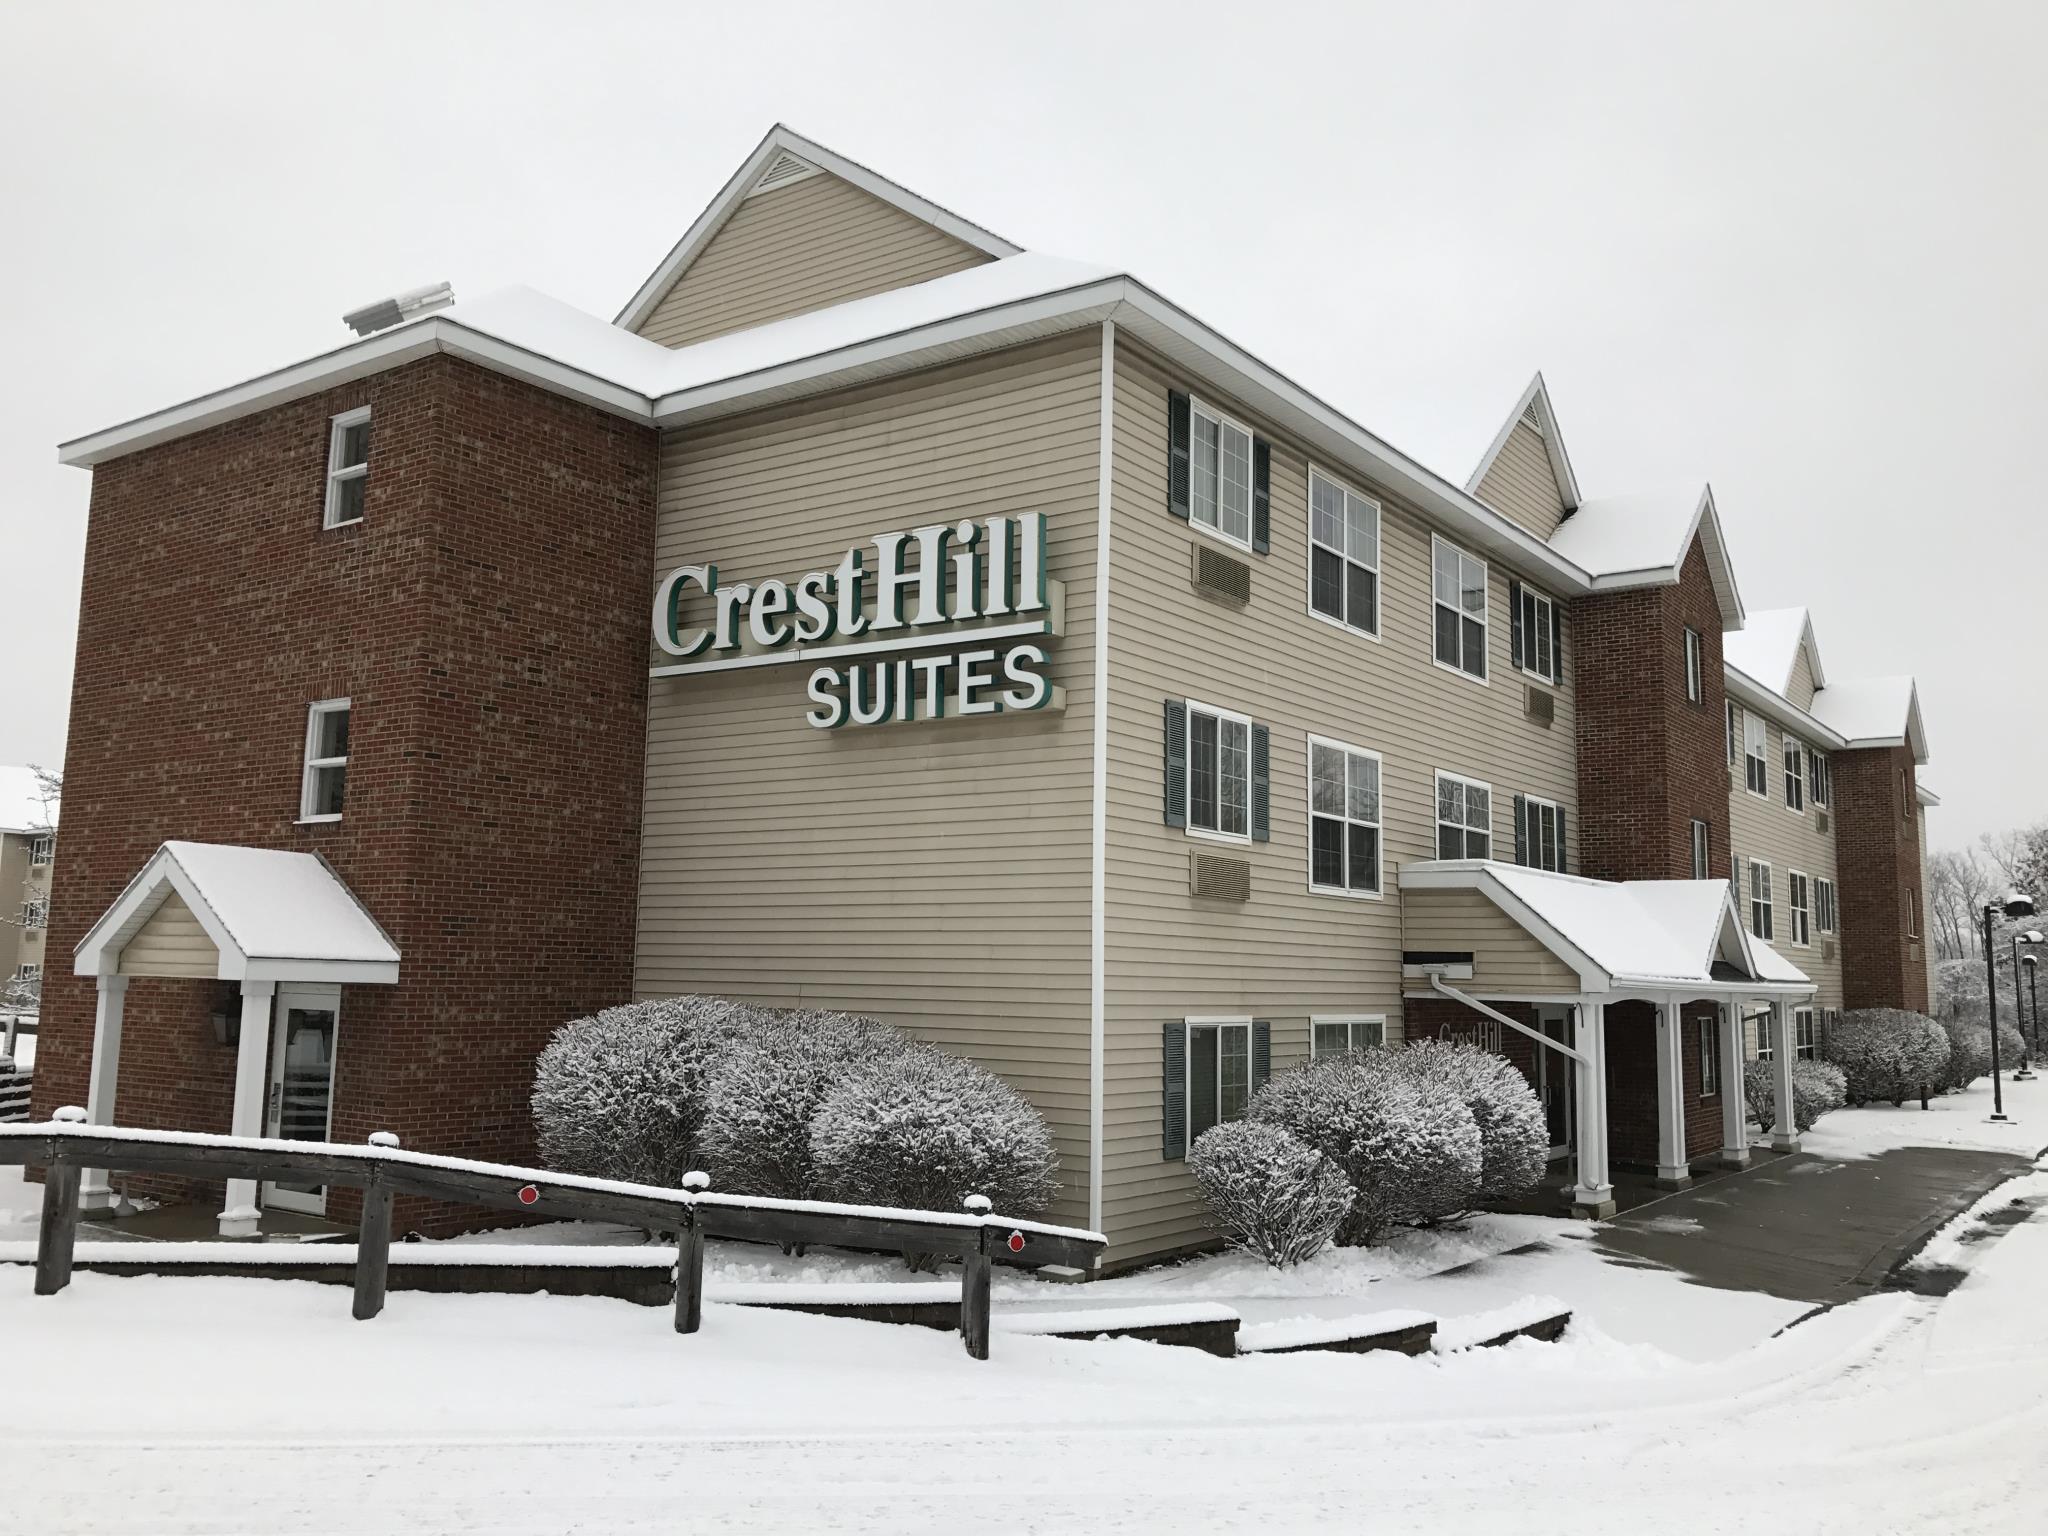 CRESTHILL SUITES ALBANY